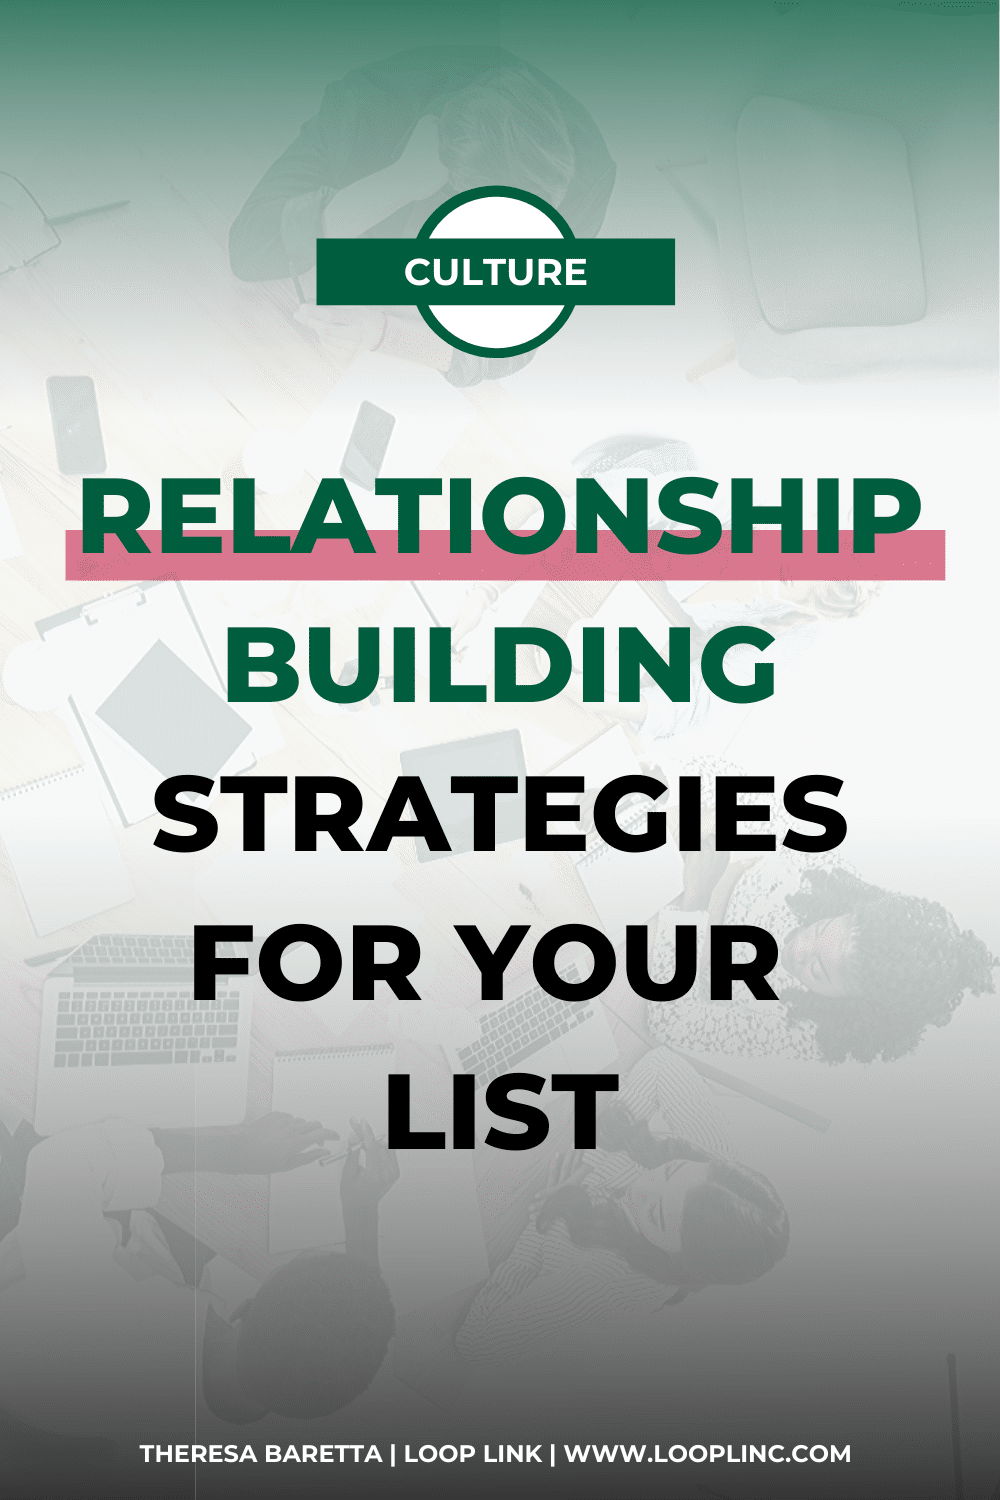 10 Relationship Building Strategies for your List